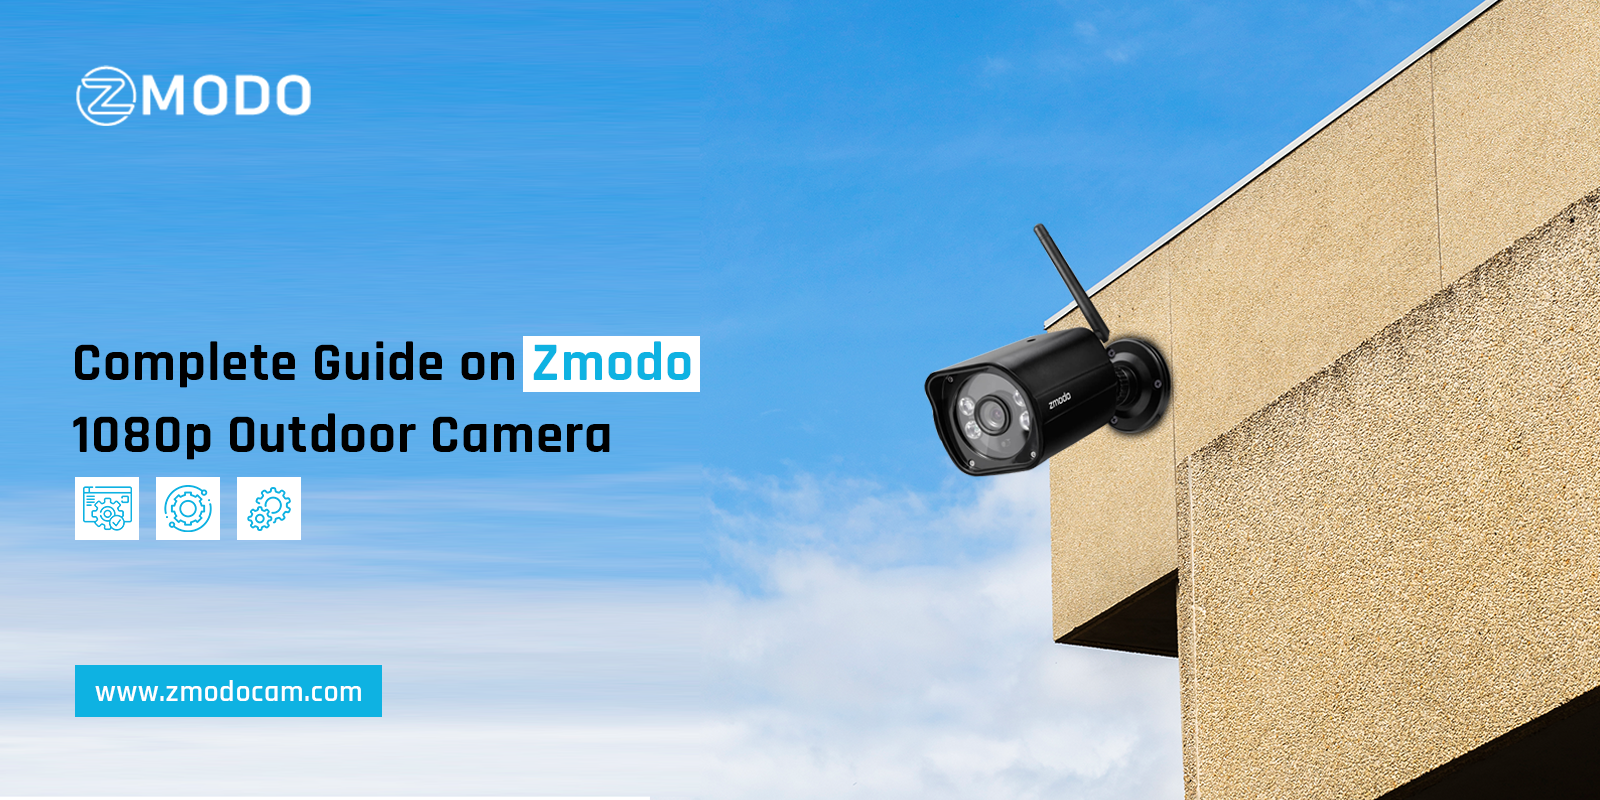 Complete Guide on Zmodo 1080p Outdoor Camera